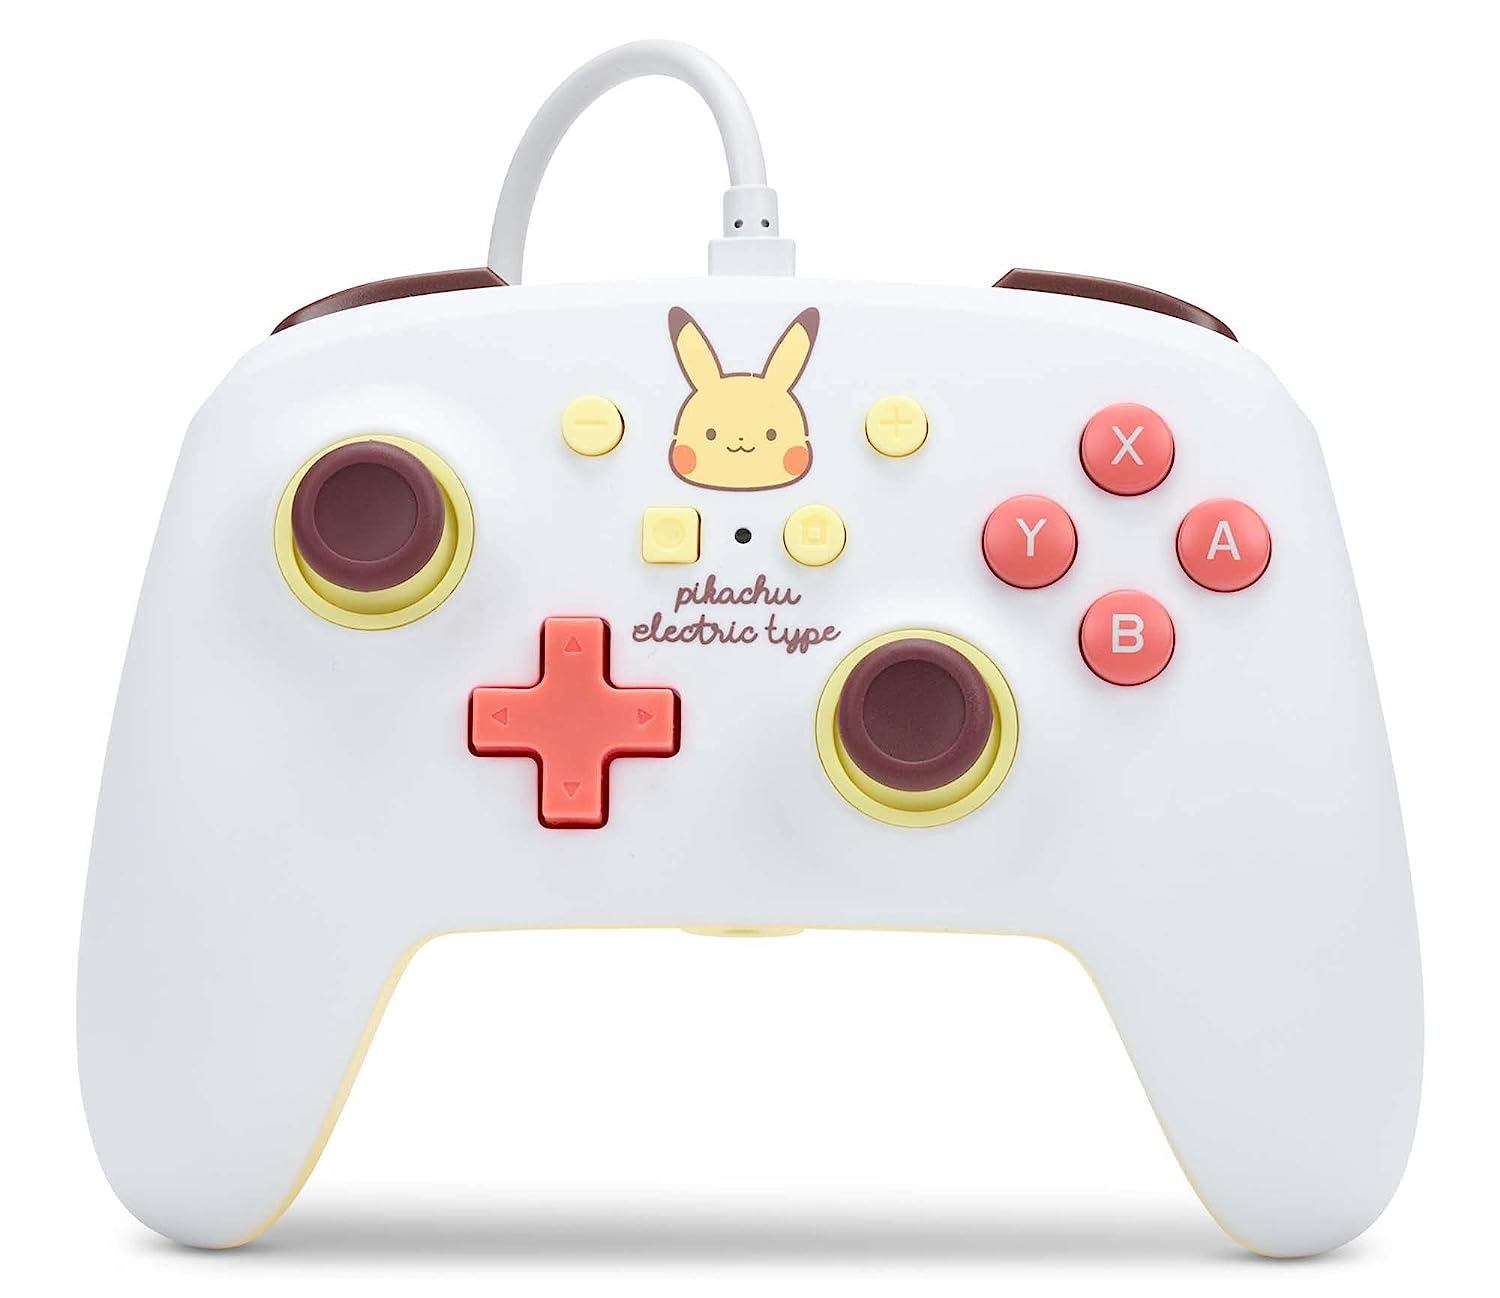 PowerA Enhanced Wired Controller for Nintendo Switch (Pikachu Electric, White) $12